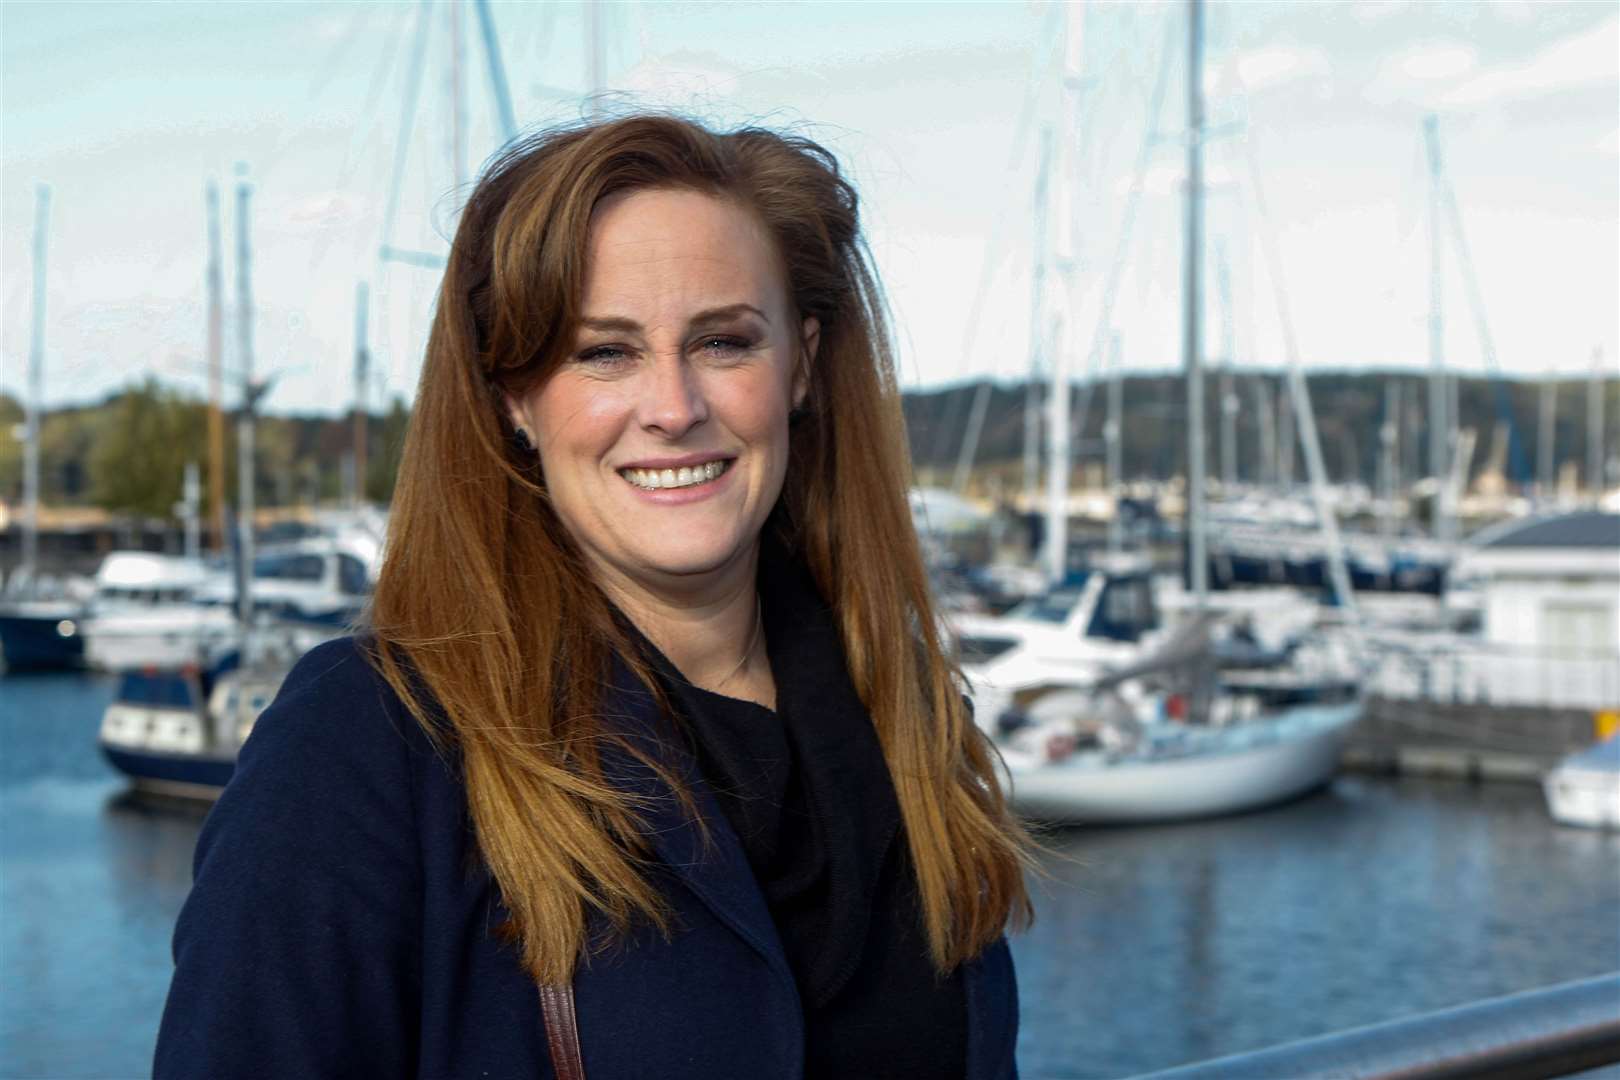 MP Kelly Tolhurst raised the issue of the closure threat for businesses at Chatham Docks in parliament last Thursday